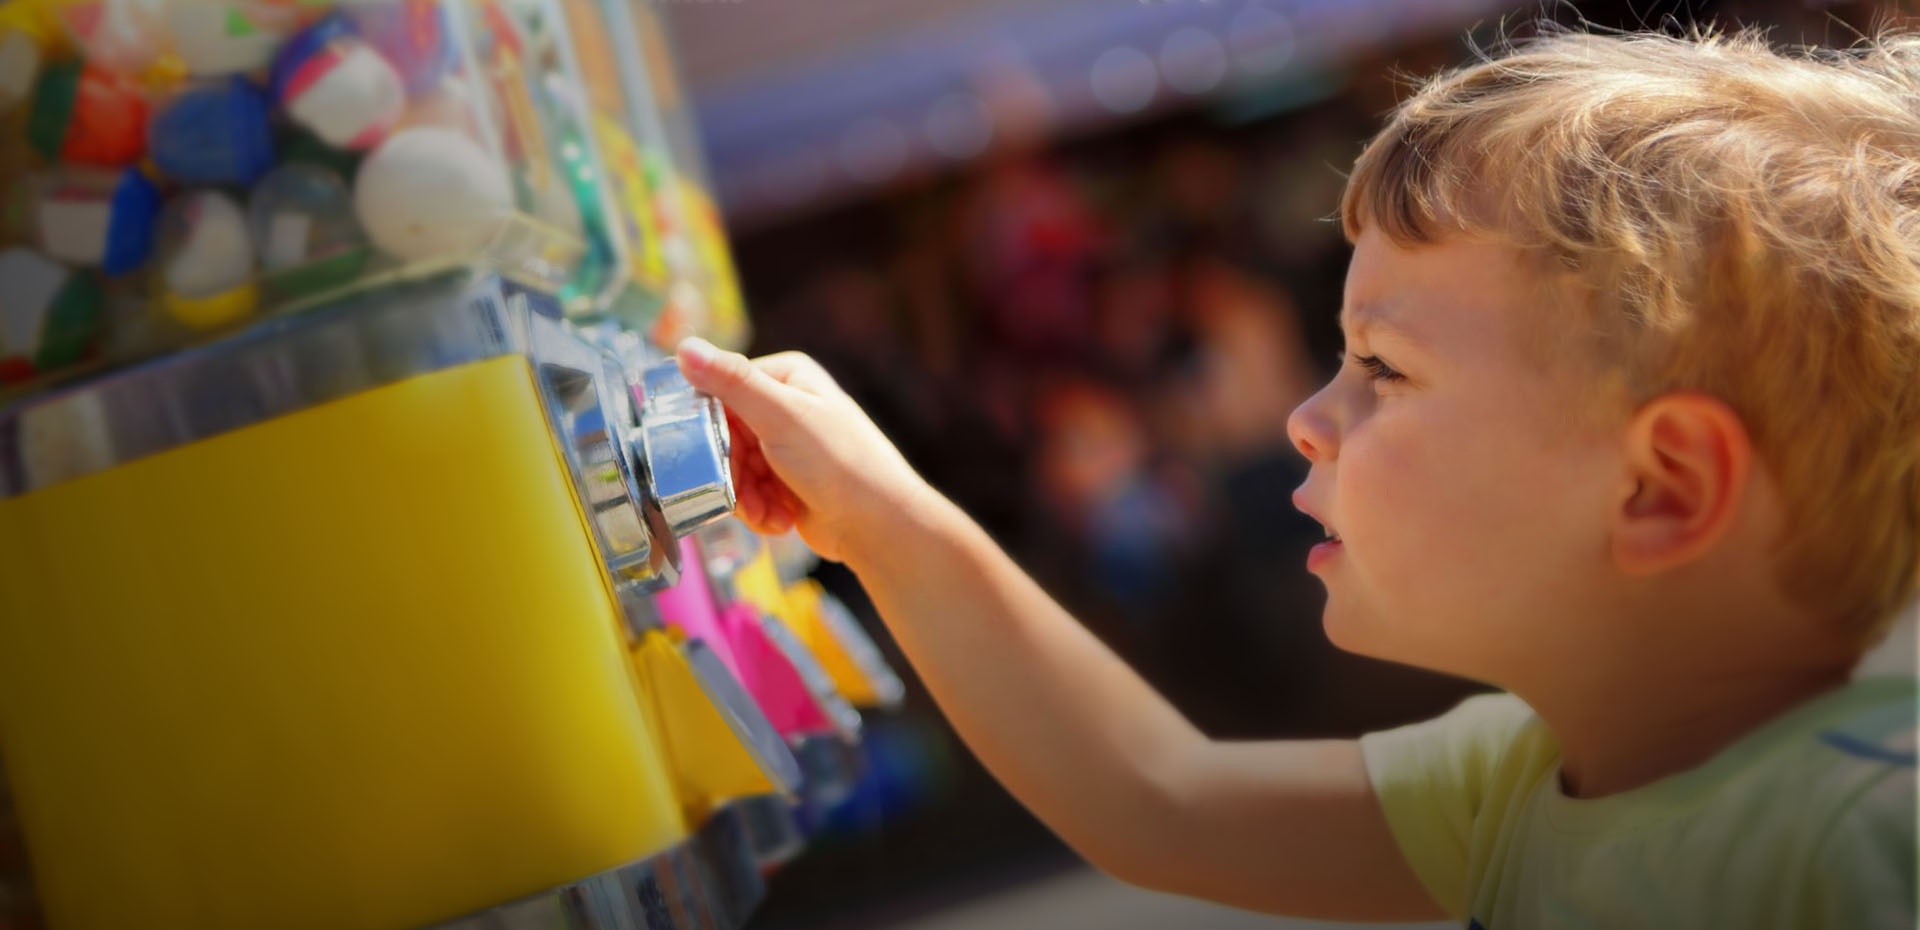 Installers Of Toys Vending Machines For Shopping Centres Stamford